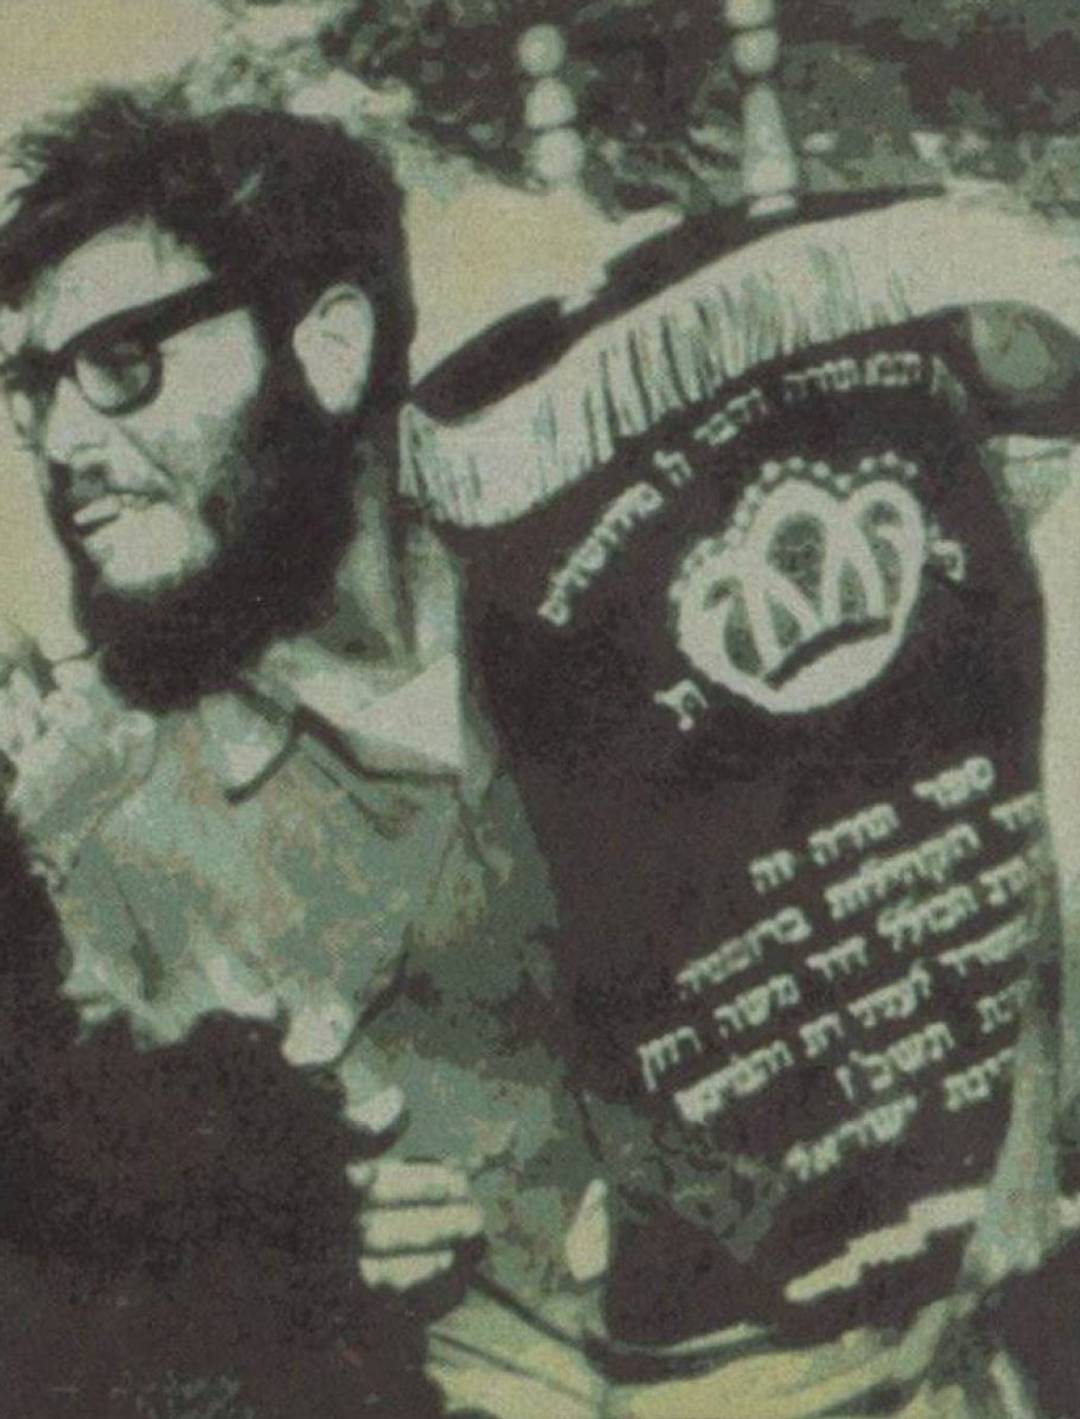 Hillel Unsdorfer carries a Torah on his way to Egyptian captivity along with his unit, 1973. About his decision, he said, ‘Most of us felt we should take the Torah with us to Egypt because it watched over us while we were fighting. We felt it should stay with us and continue to guard us.’